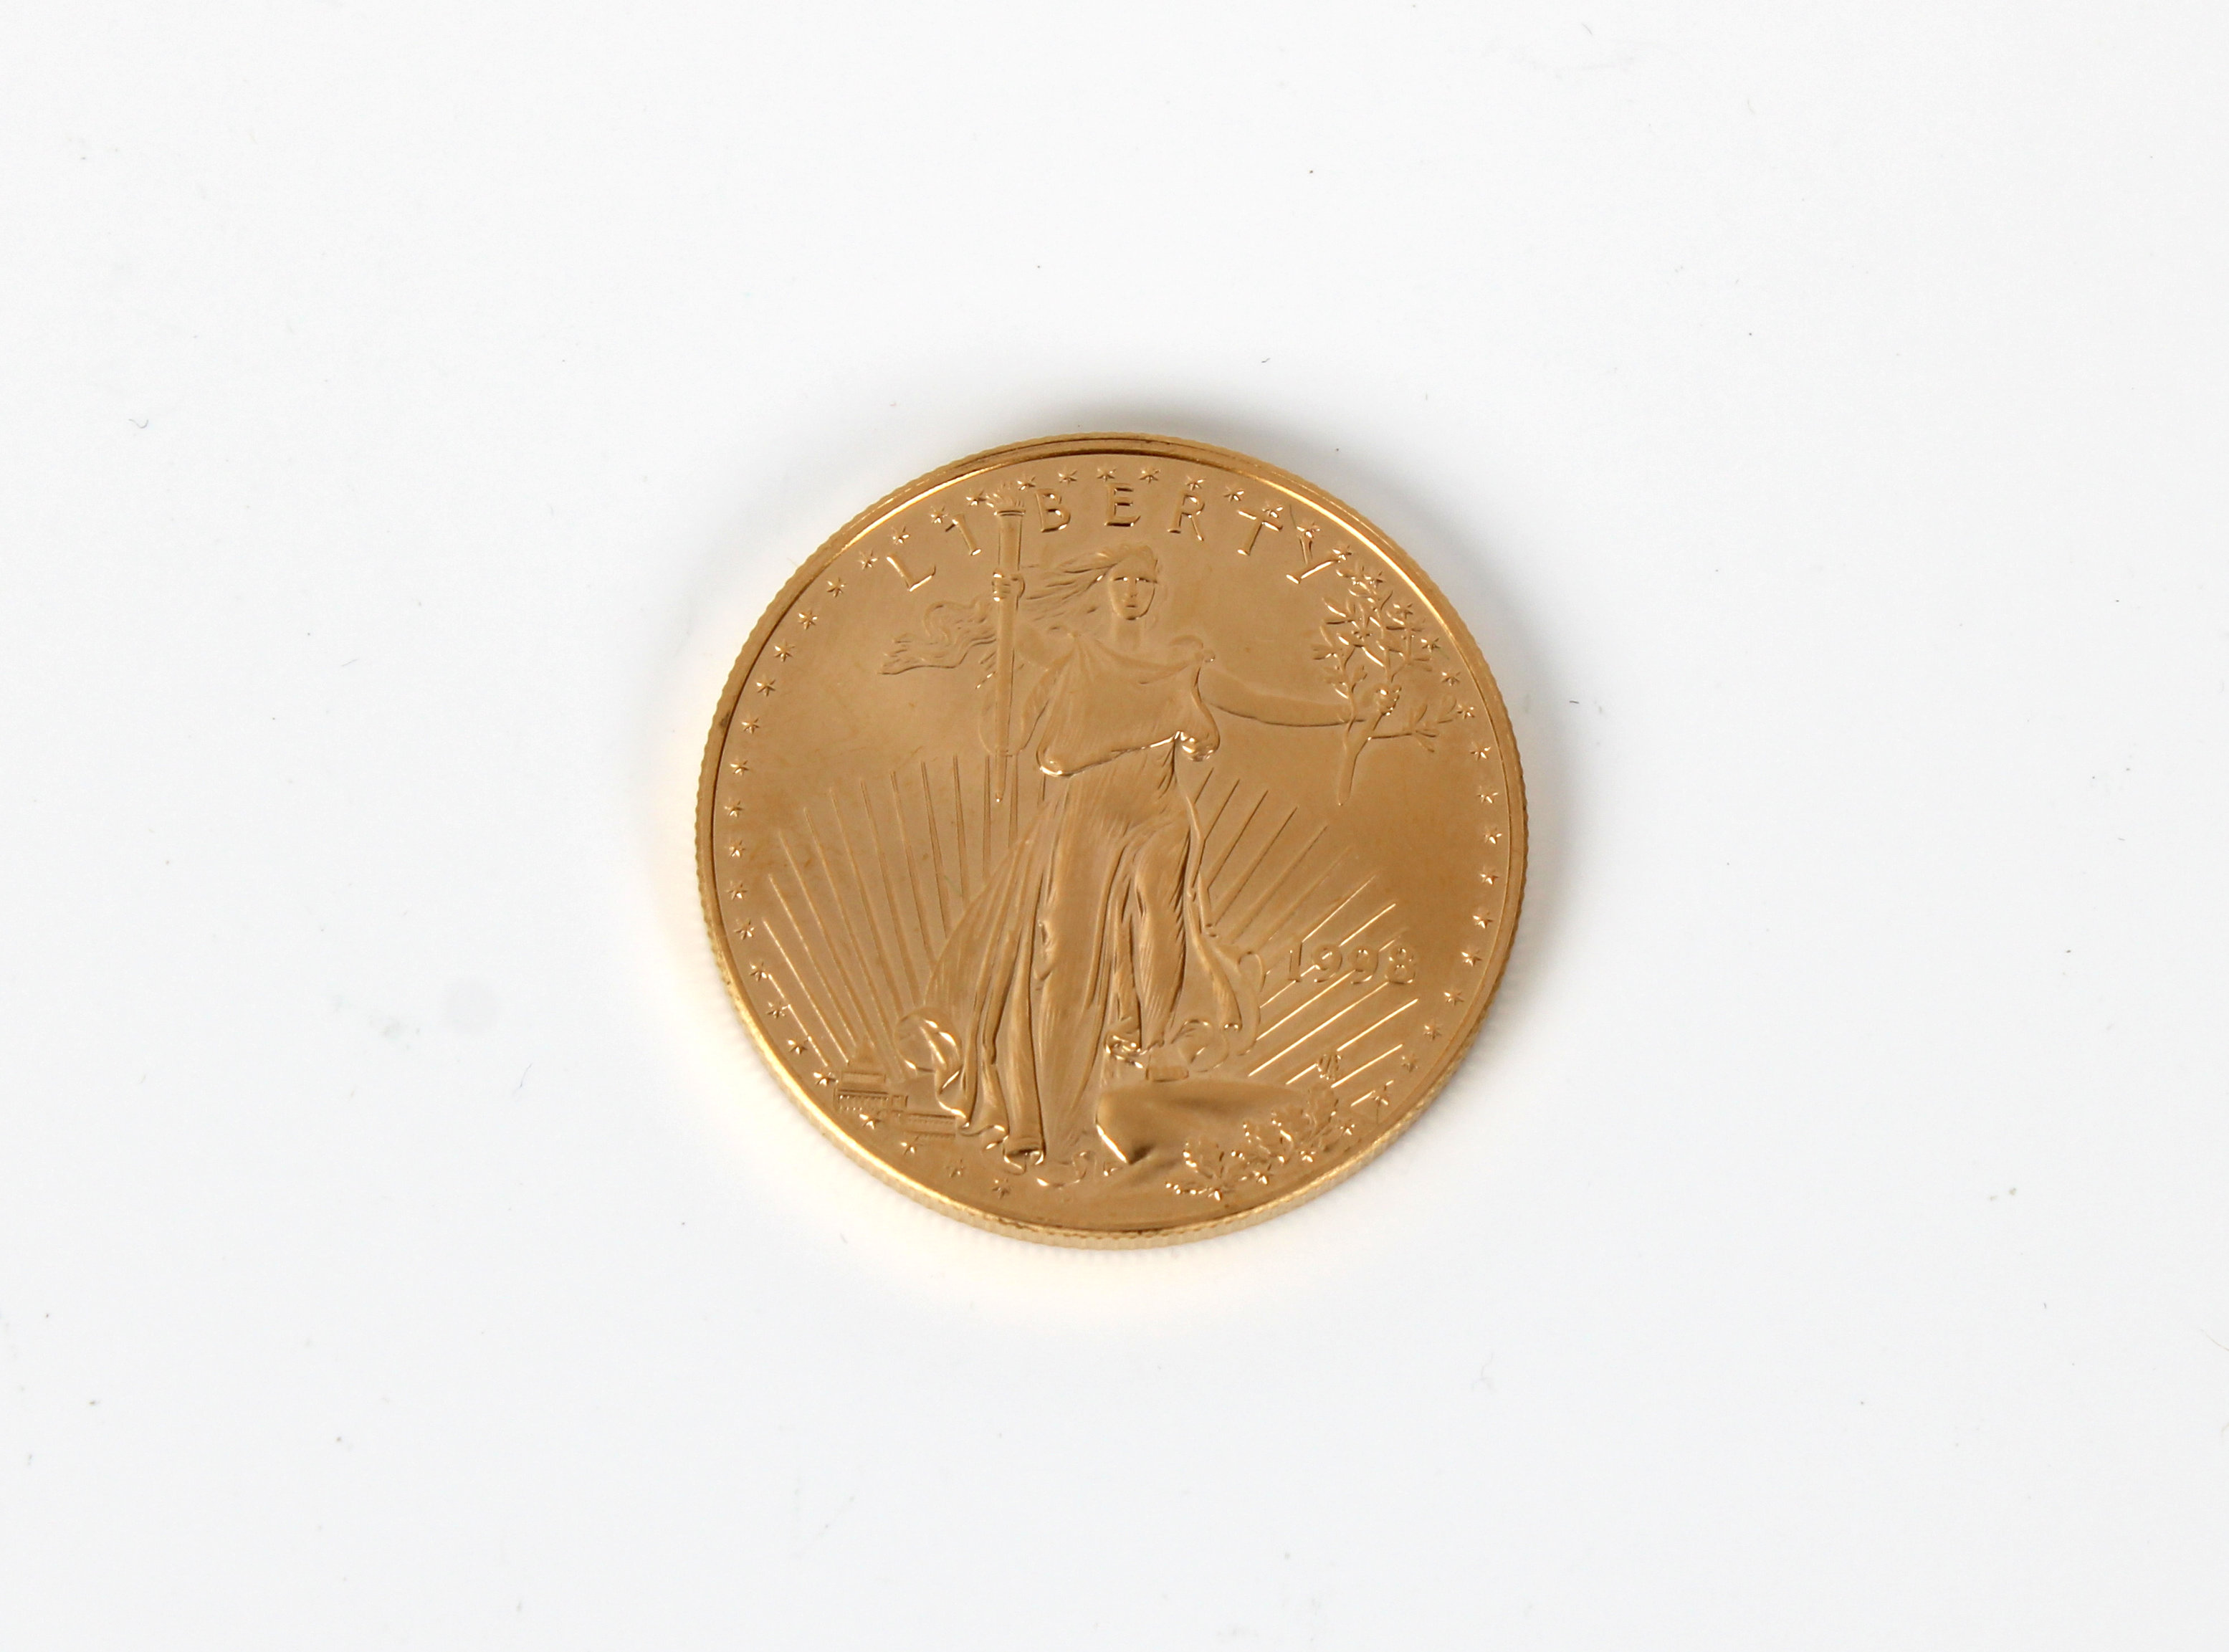 A United States of America 1998 Gold Eagle (Liberty) 1oz Fine Gold - 50 Dollars. - Image 2 of 2